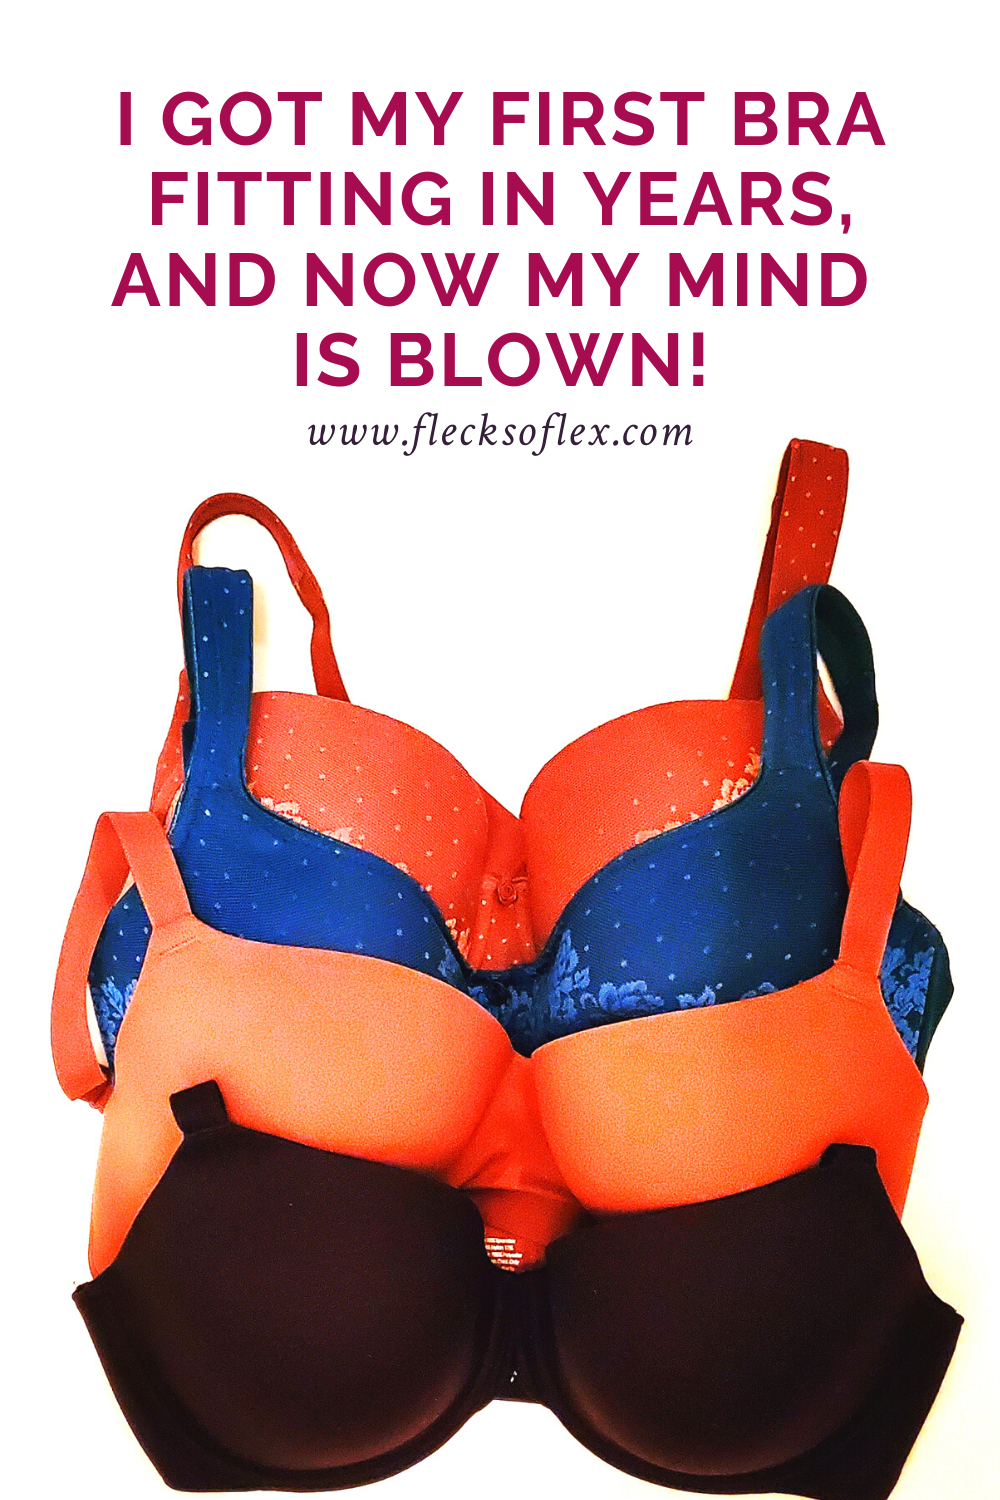 I Got My First Bra Fitting in Years, and Now My Mind is Blown